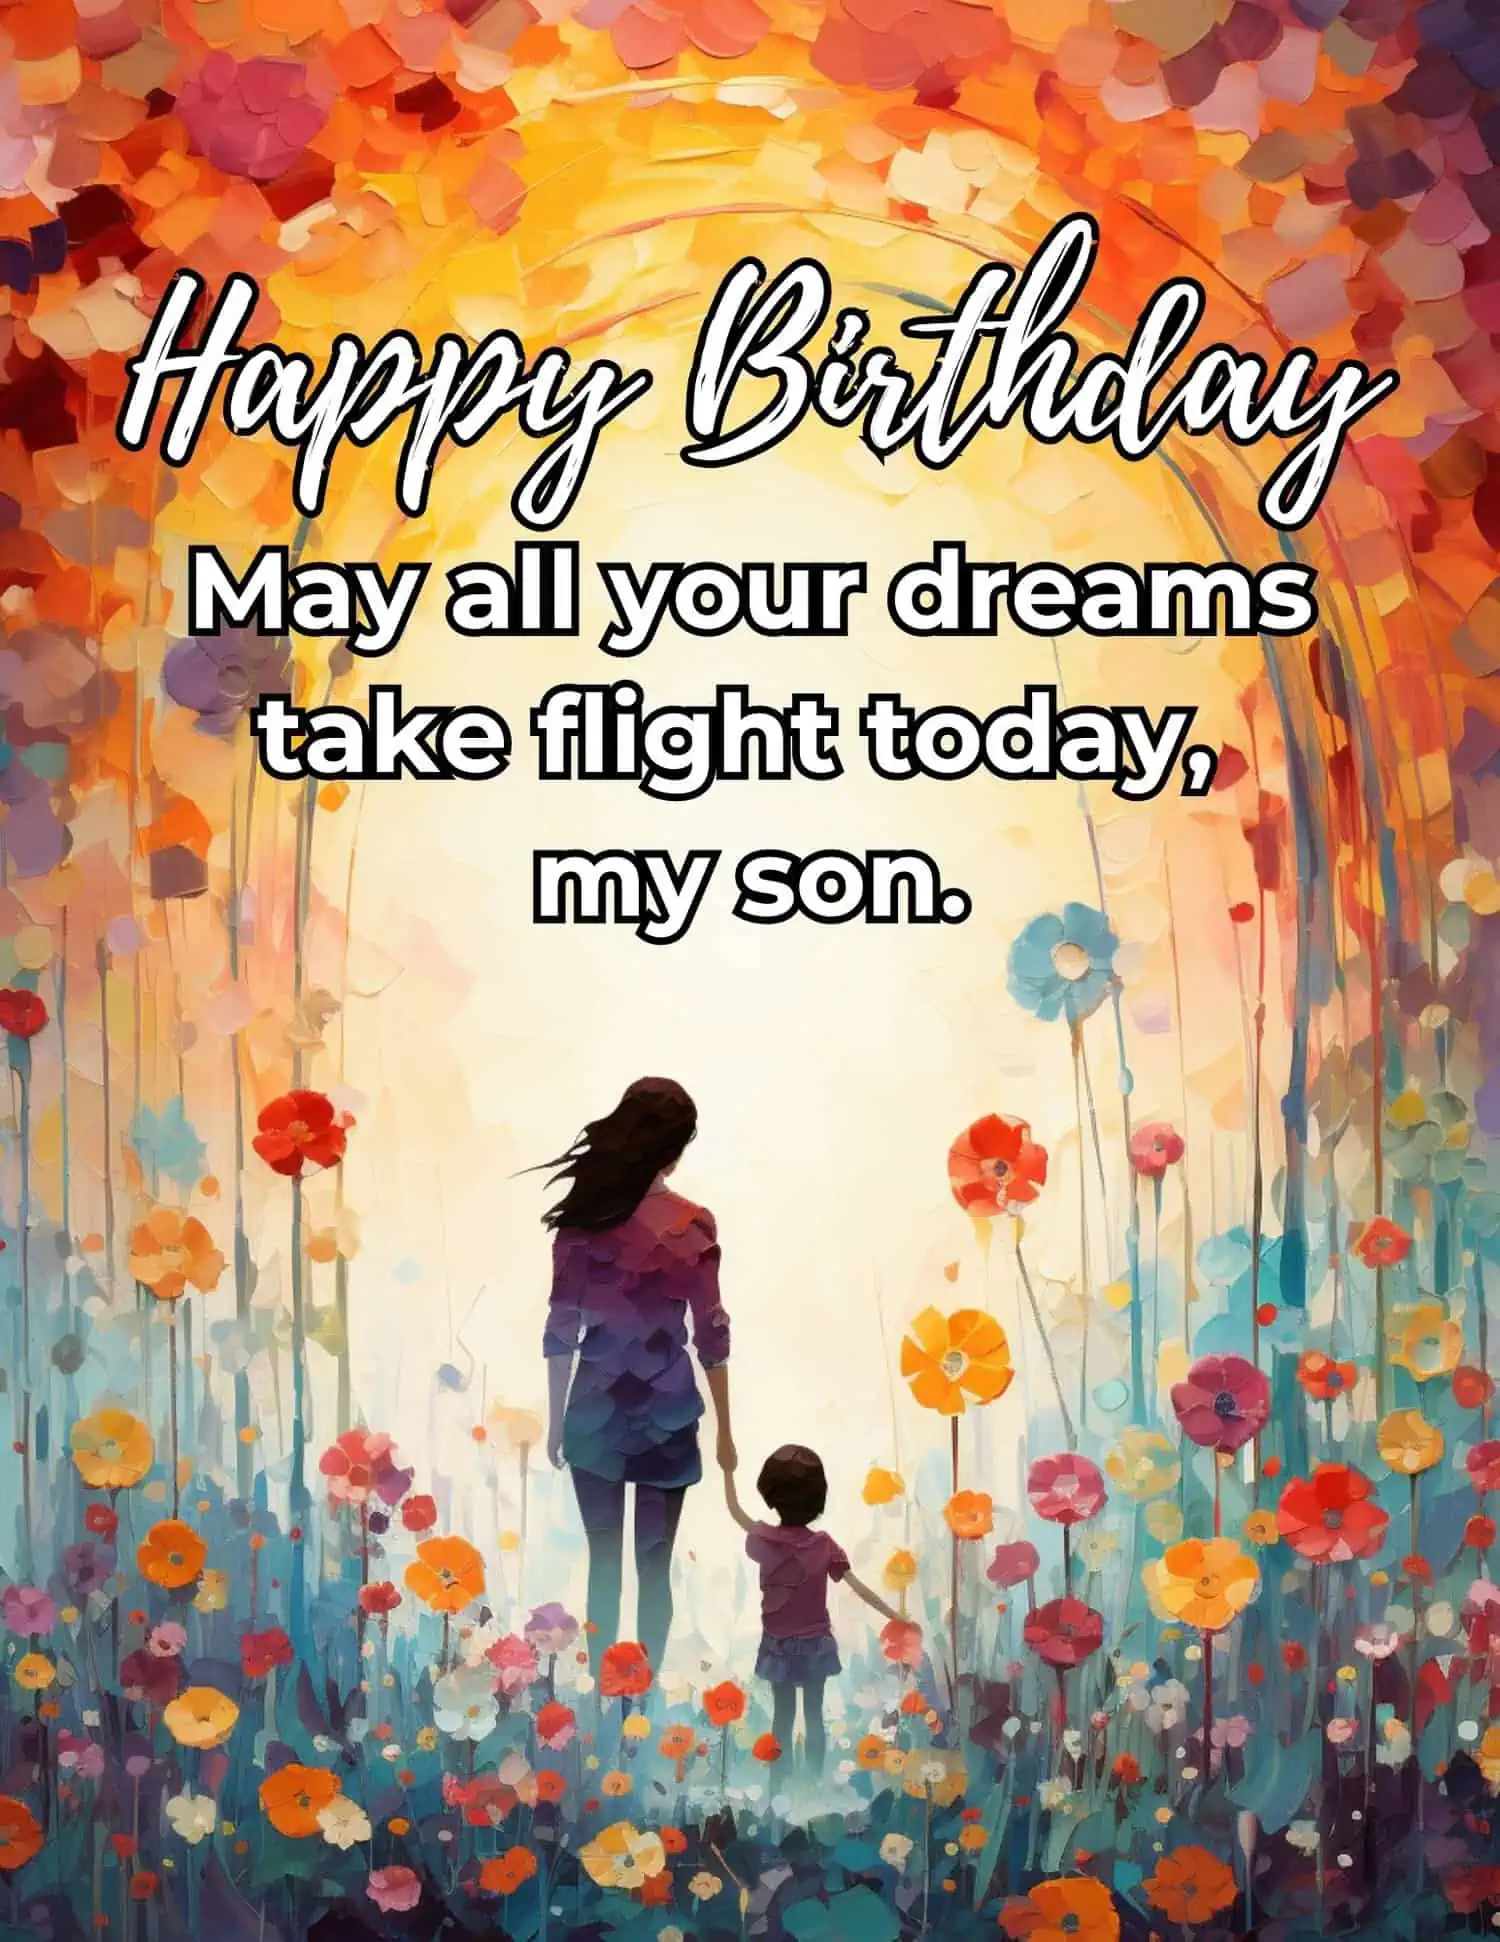 A collection of touching and heartfelt wishes for your son's birthday from a mother’s perspective.